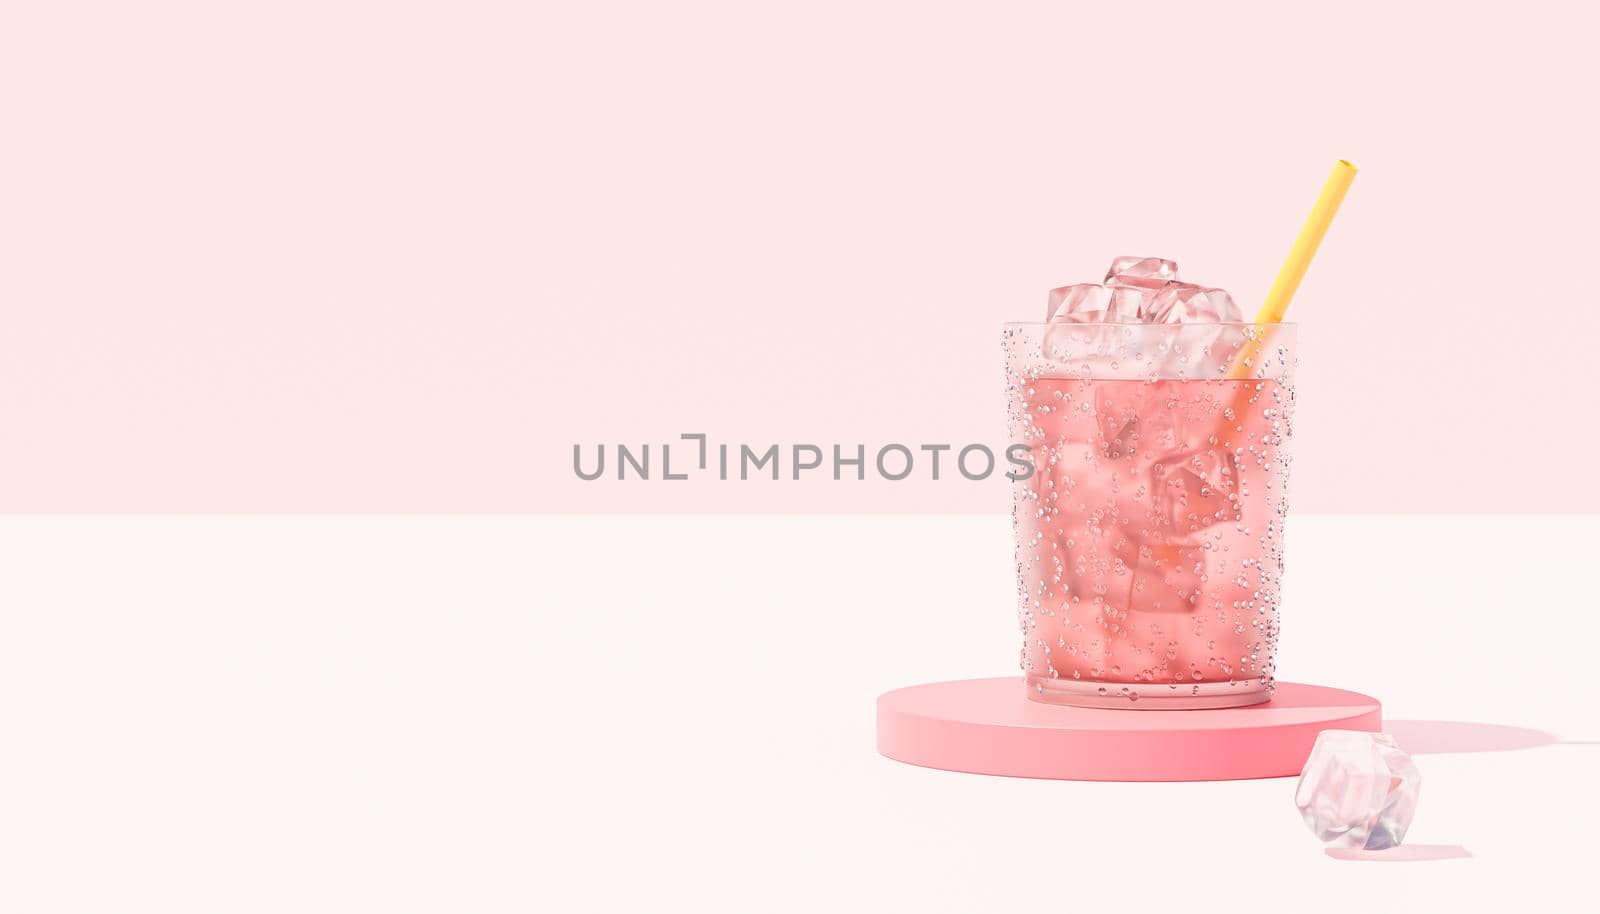 Drink in glass with ice and straw on pink background, copy space, 3d render